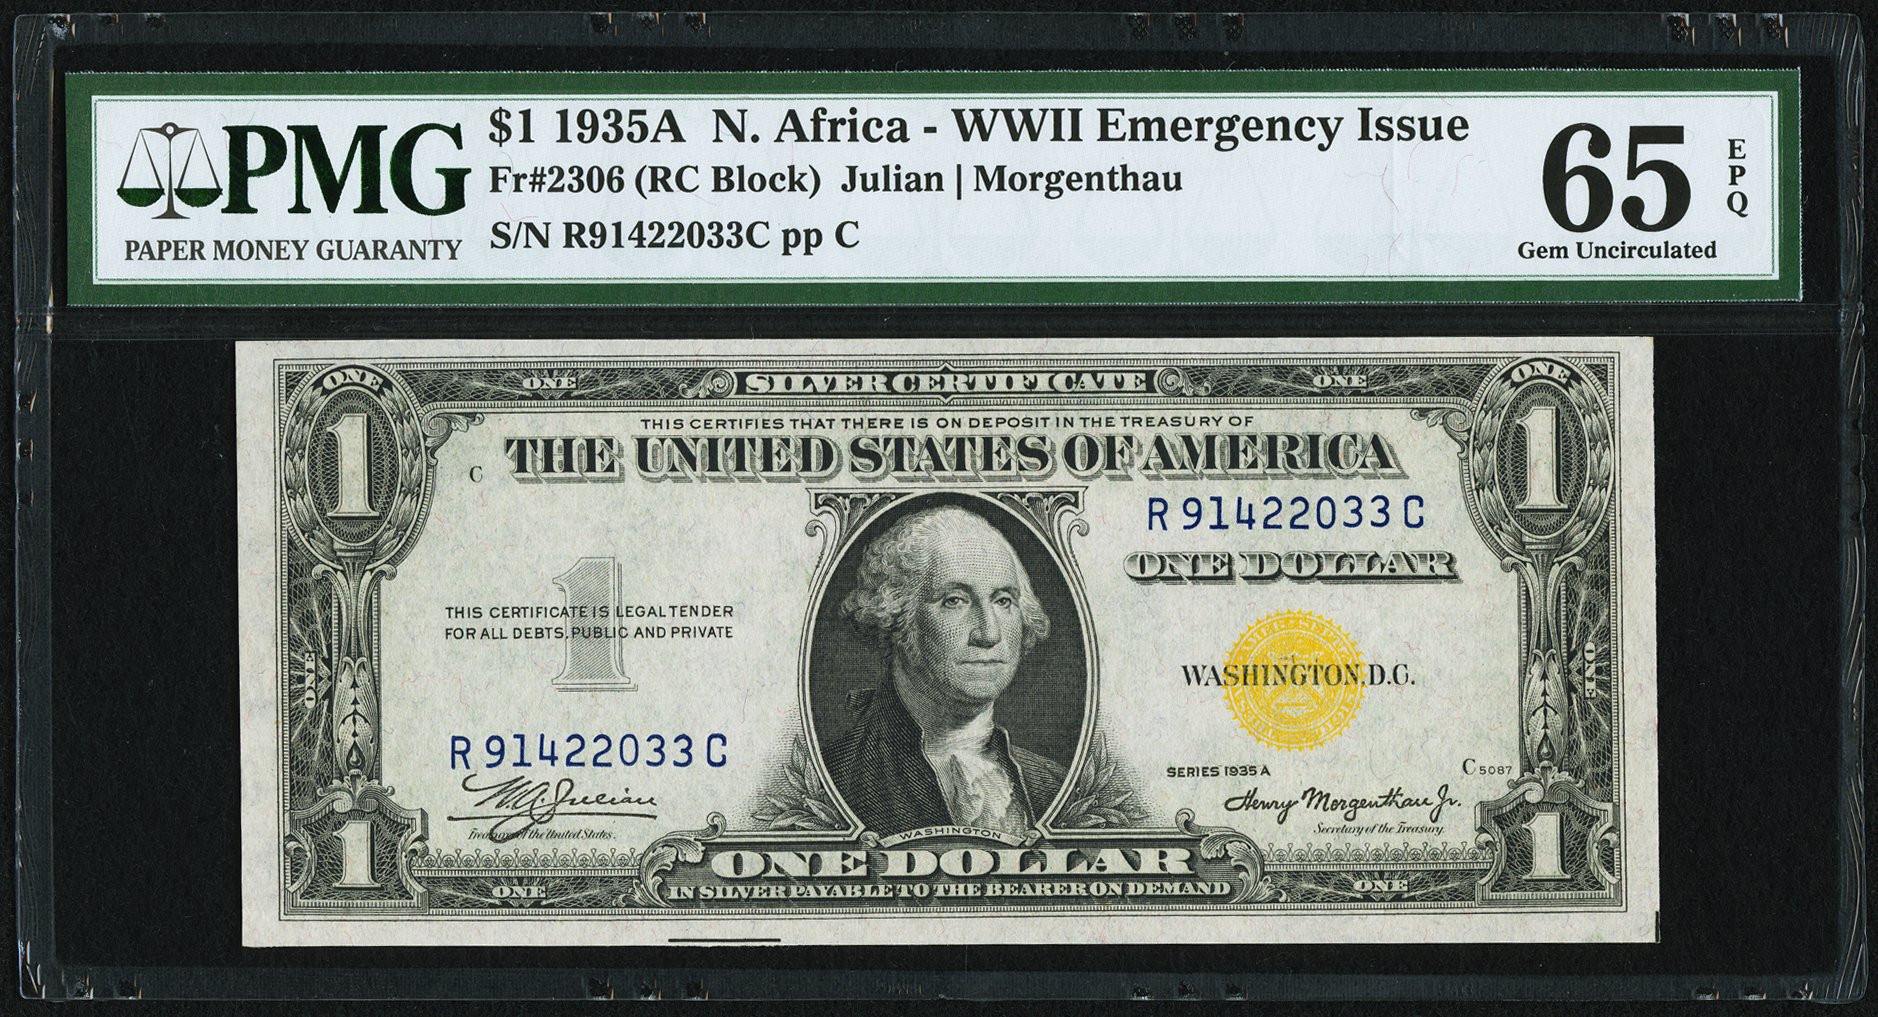 1935A $1 SC FR #2306 N. Africa WWII front.jpg